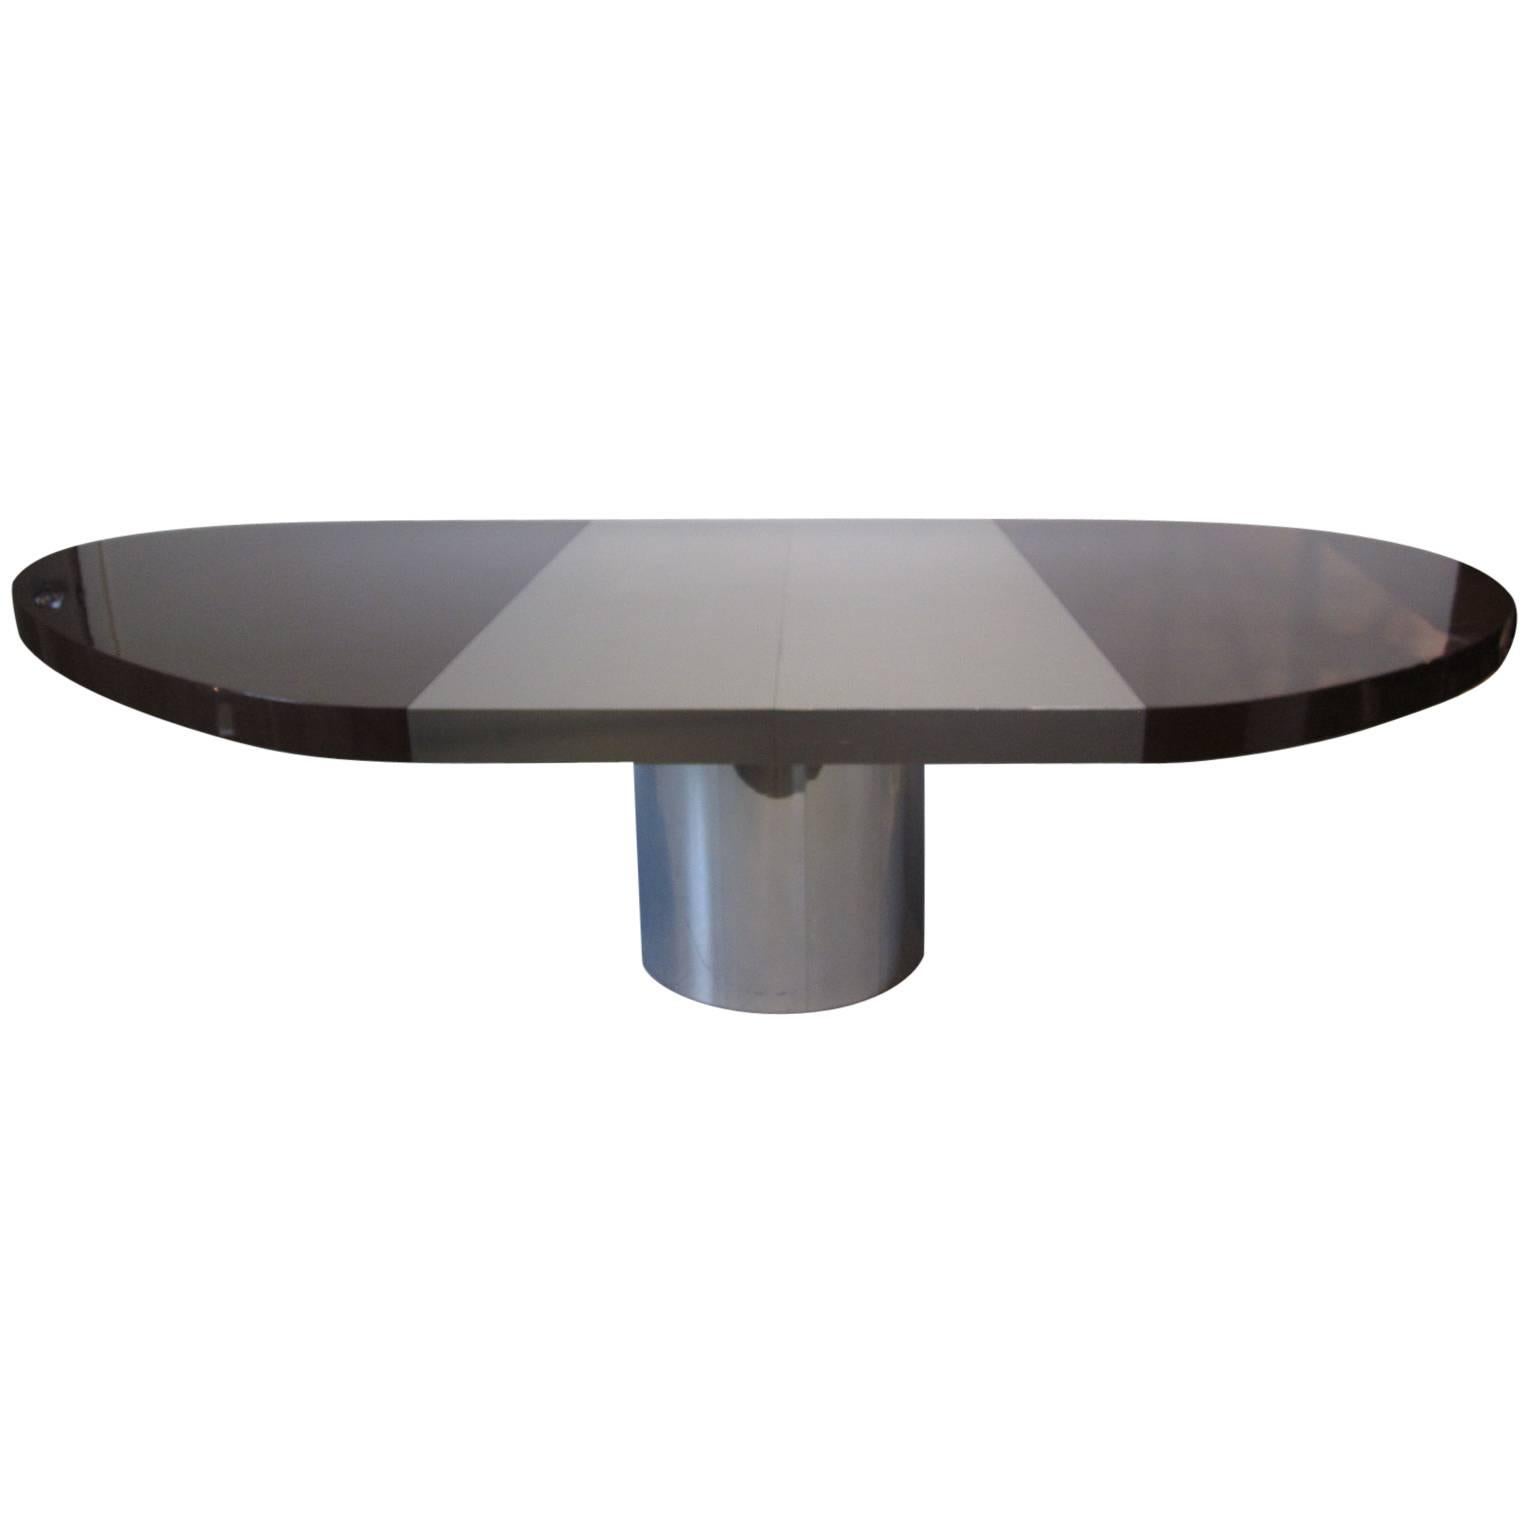 Paul Evans Directional Elliptical Dining or Conference Table